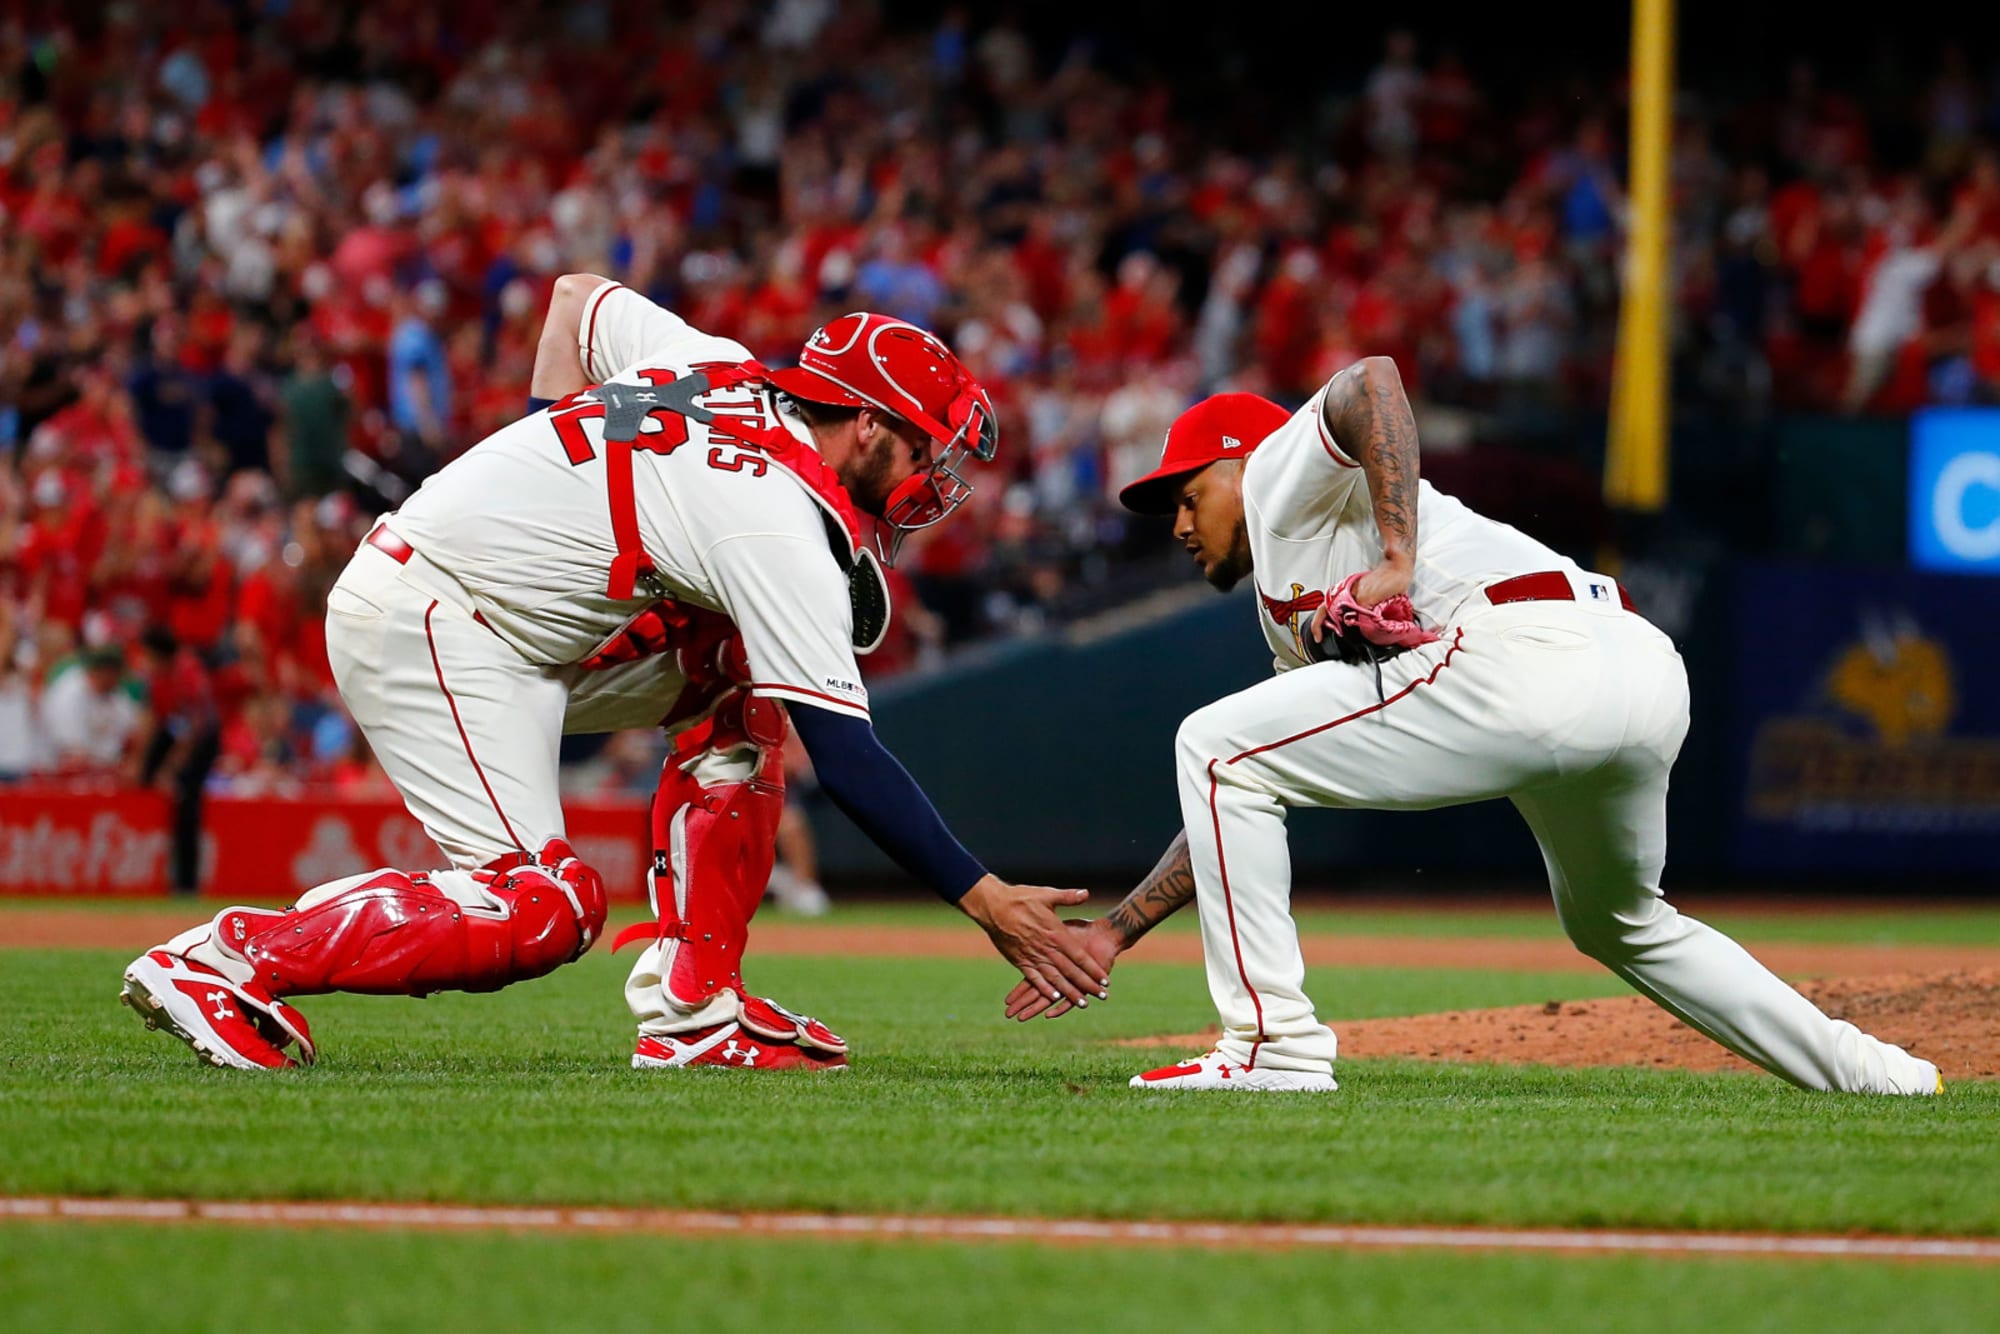 St. Louis Cardinals: The playoffs are still a possibility, for better or worse